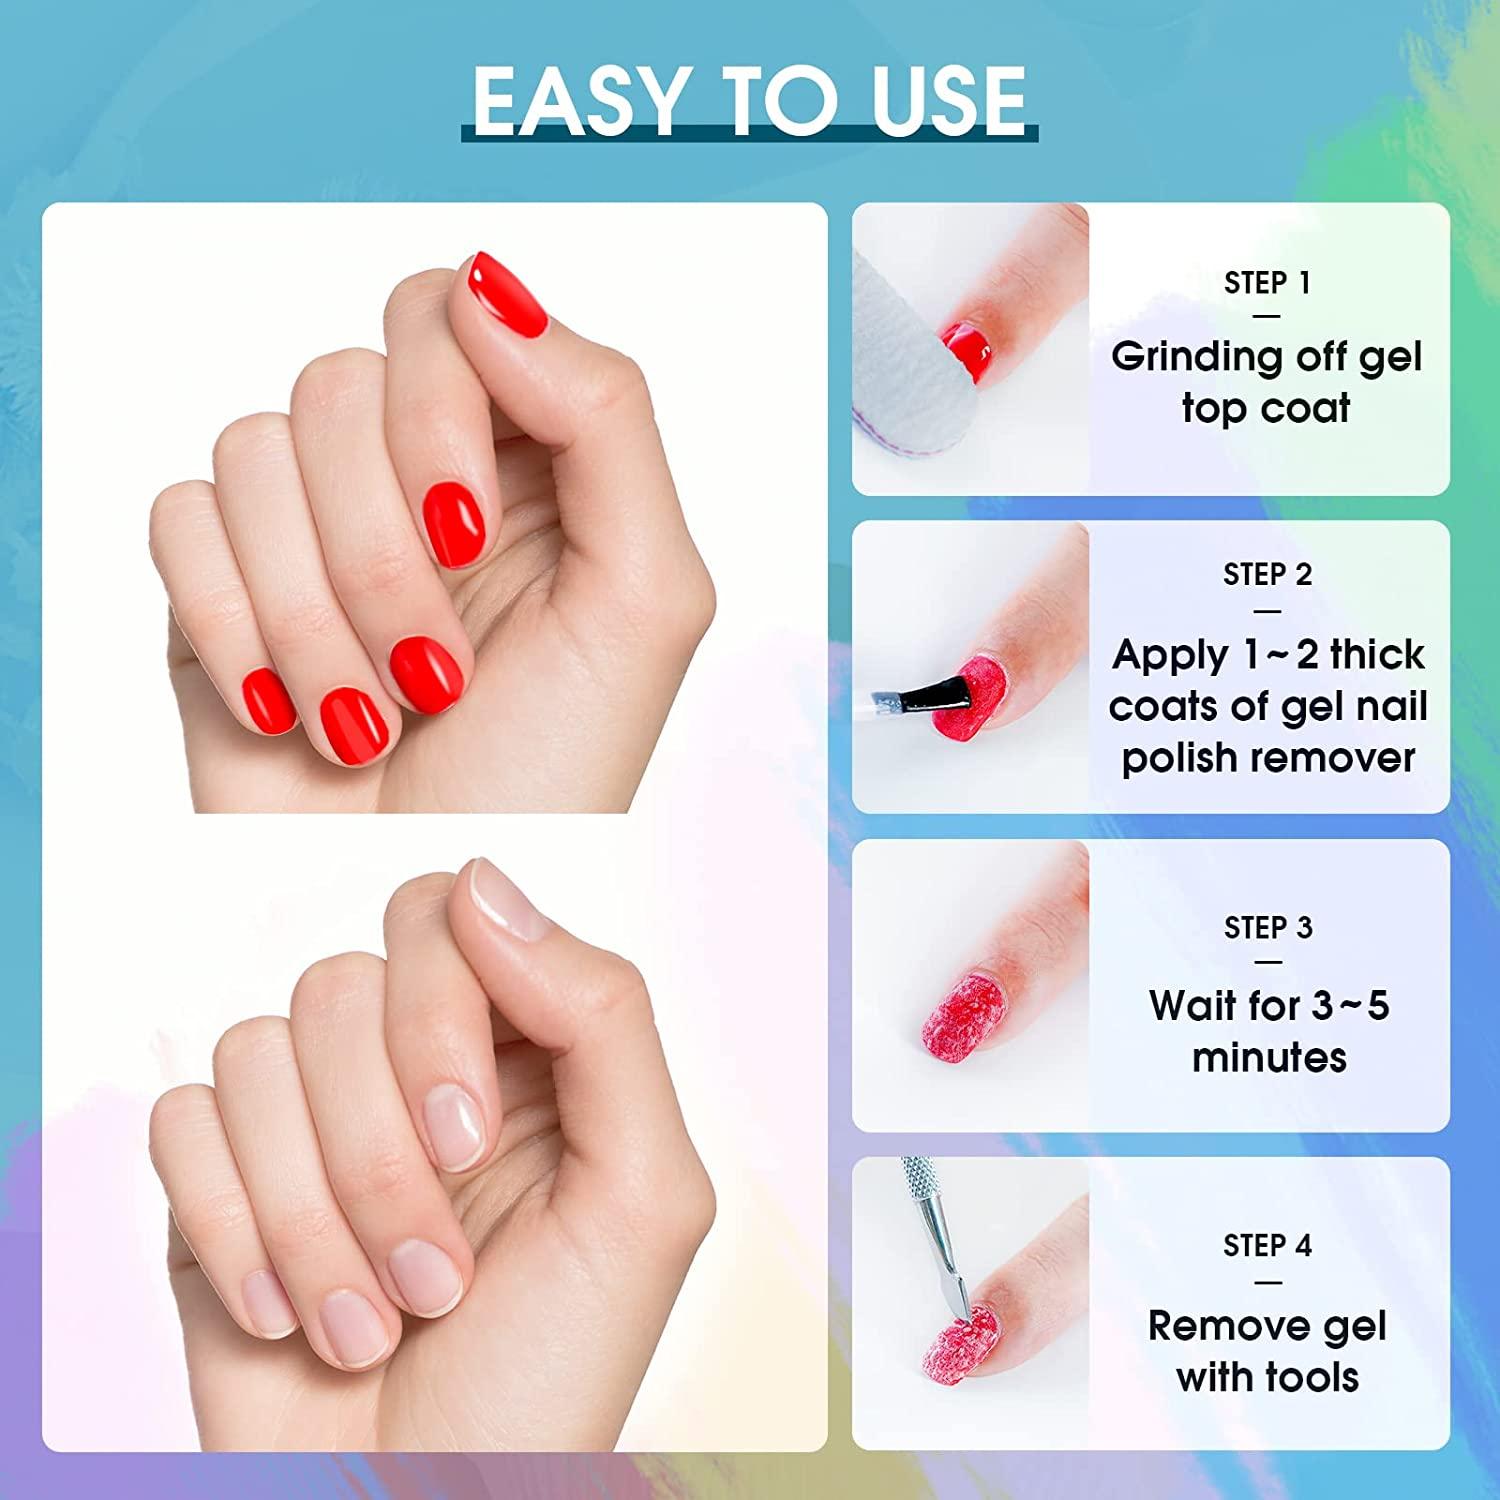 Gel Nail Polish Remover, Gel Remover for Nail Polish, In 2-5 Minutes to  Remove,Free from Wrap with Aluminum Foil, Easily and Safely | Gel nail  polish remover, Nail polish, Gel remover